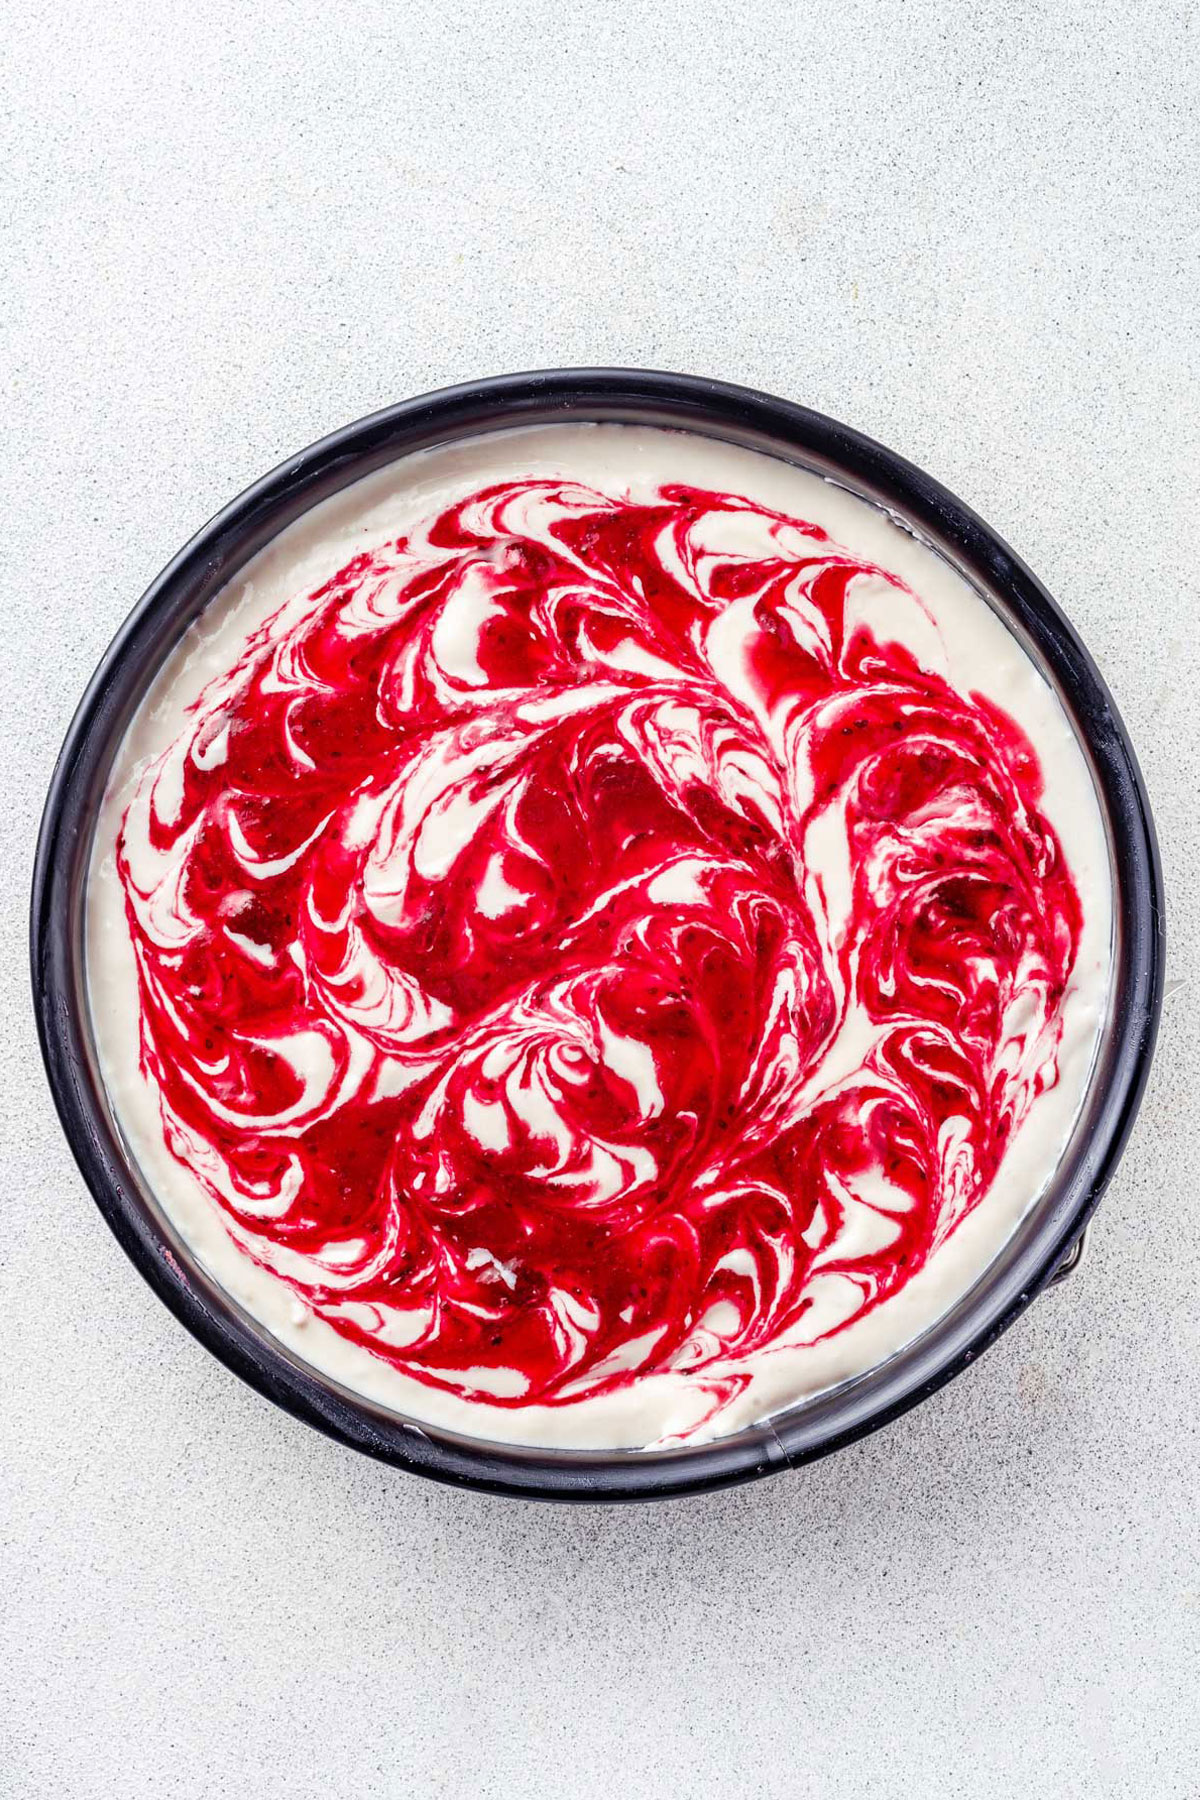 Top of no-bake cheesecake swirled with cranberry sauce